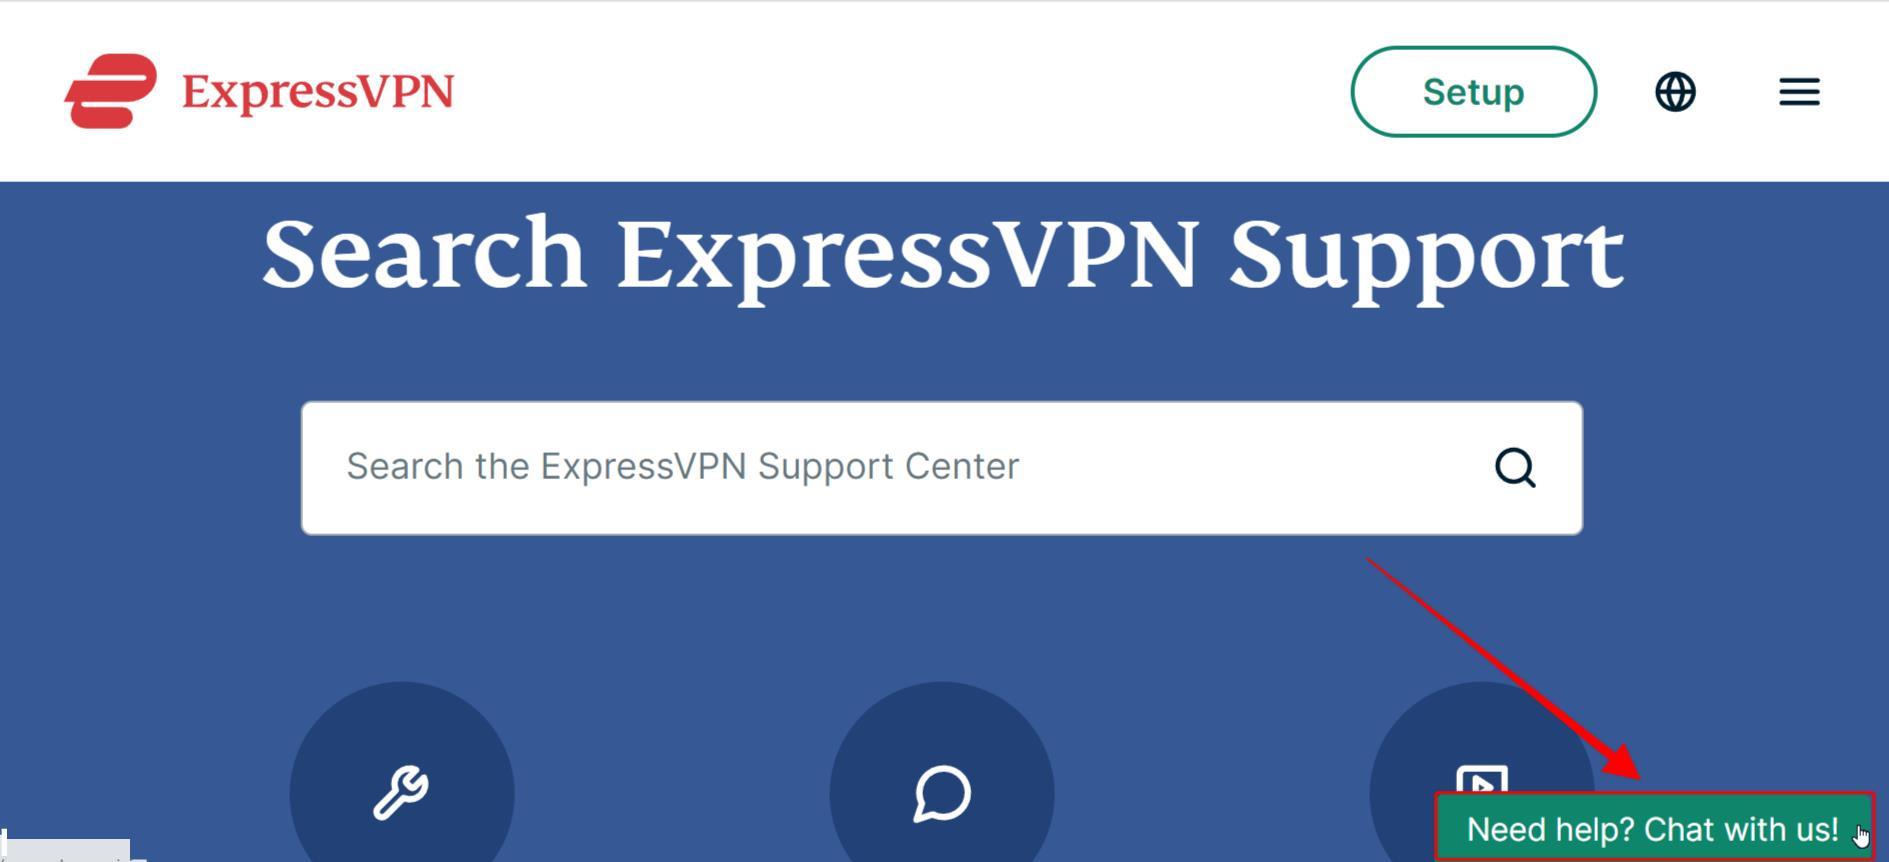 You can chat with ExpressVPN customer support by clicking the green chat button in the bottom right of the support page.